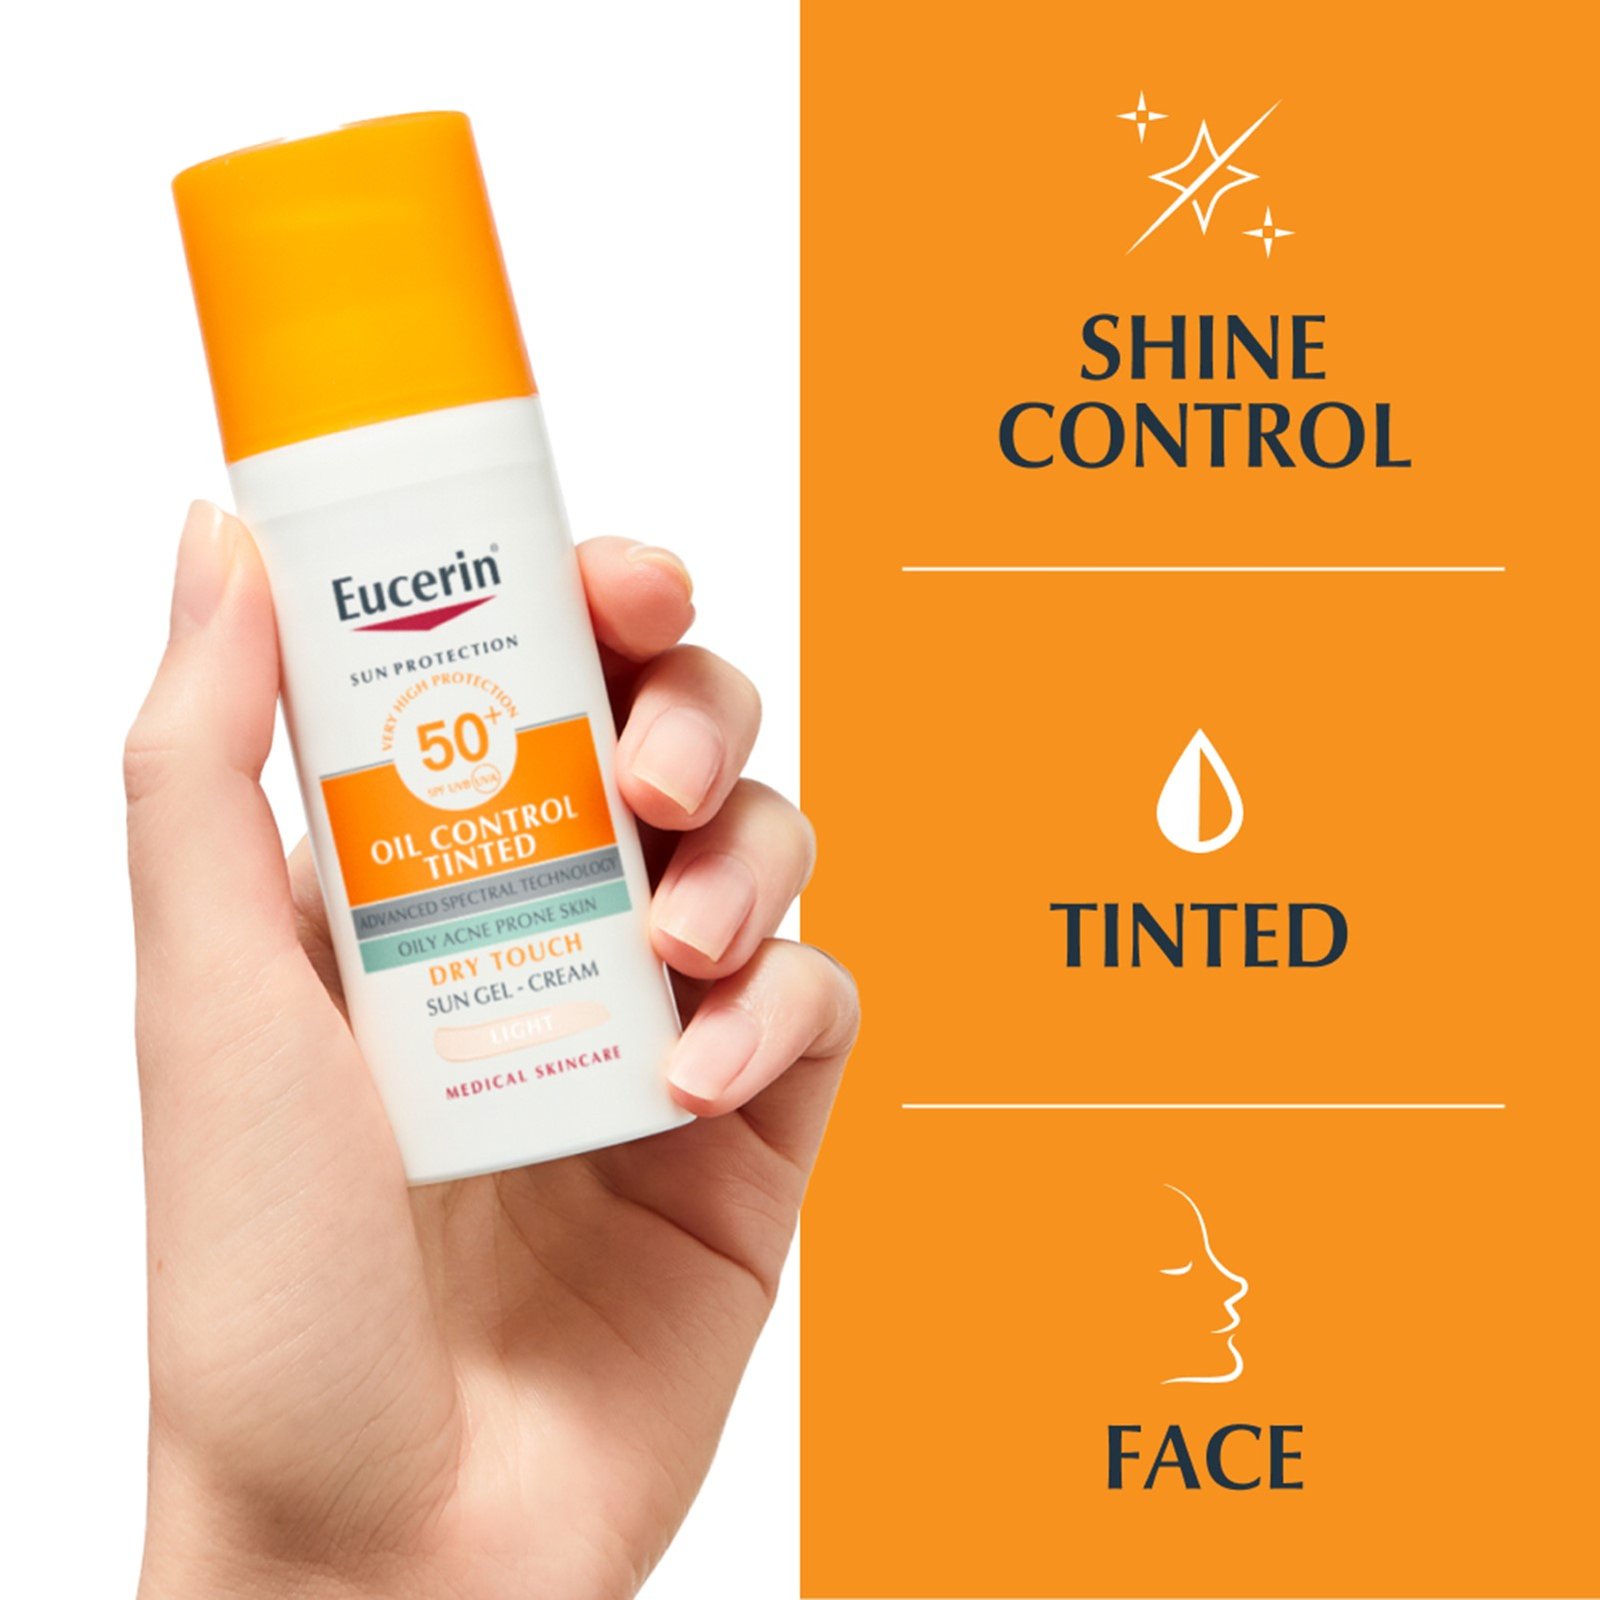 Eucerin Oil Control Sun Gel-Cream Dry Touch SPF50+ review - twindly beauty  blog